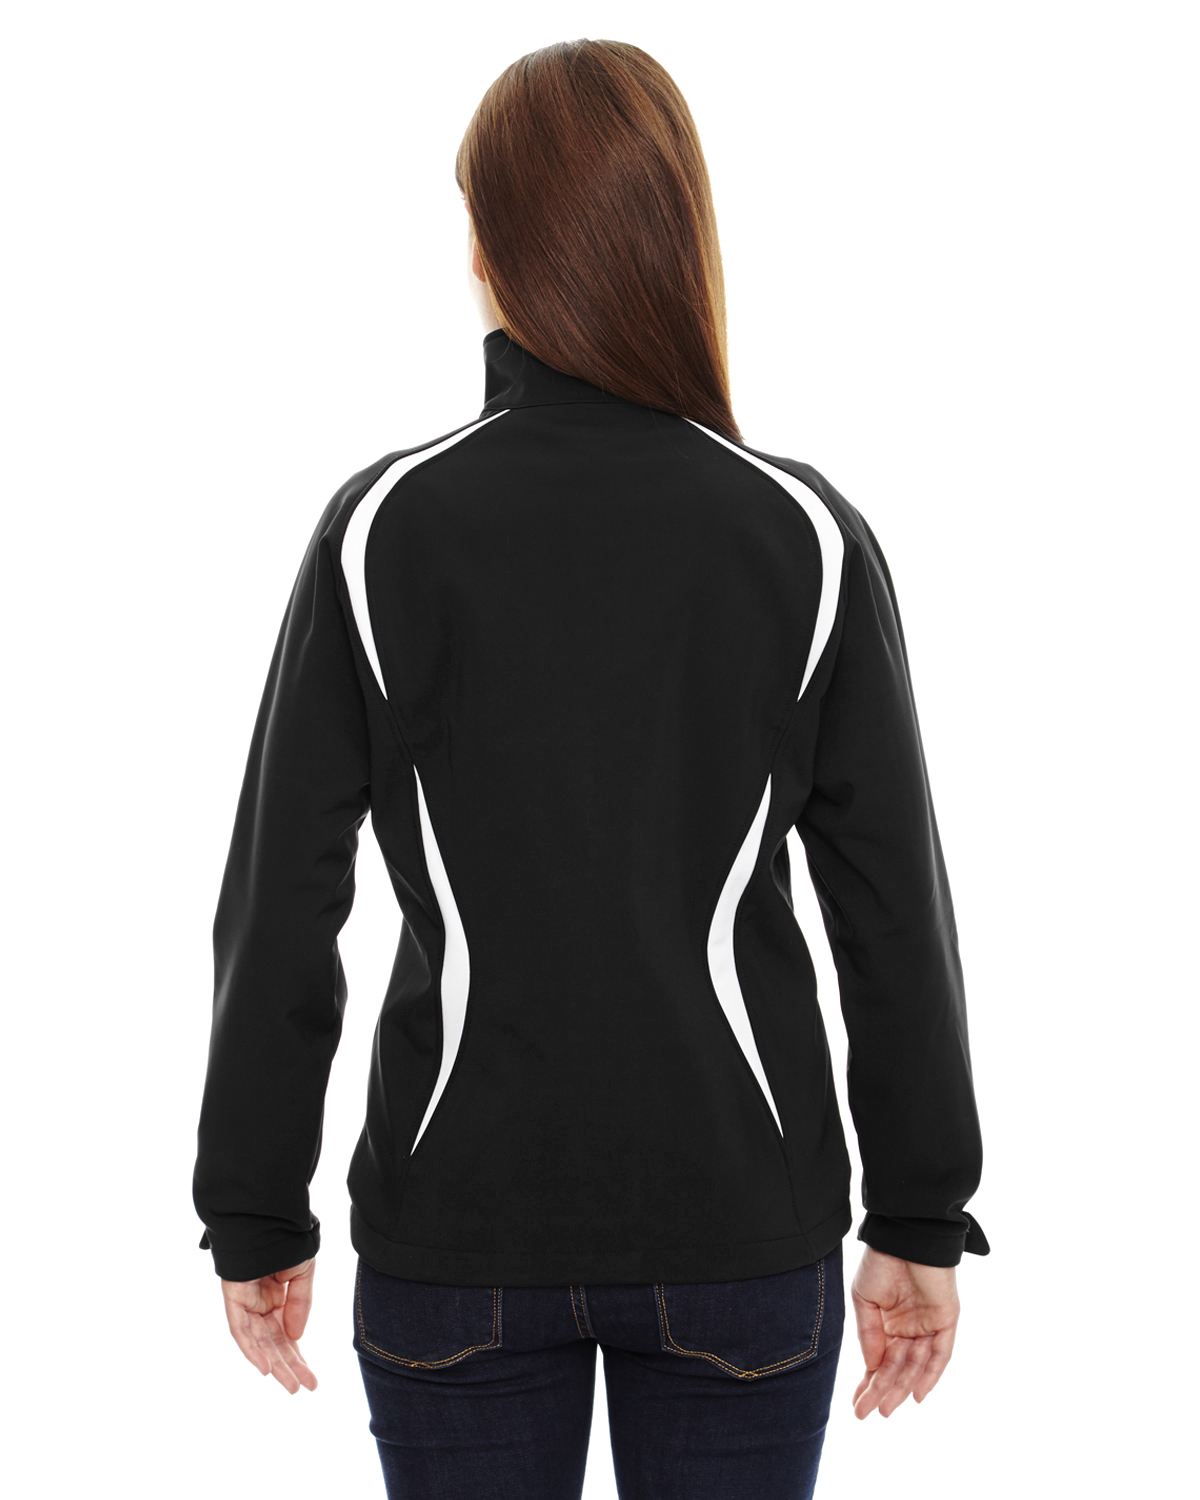 Ash City - North End Ladies' Enzo Colorblocked Three-Layer Fleece Bonded Soft Shell Jacket - image 3 of 3